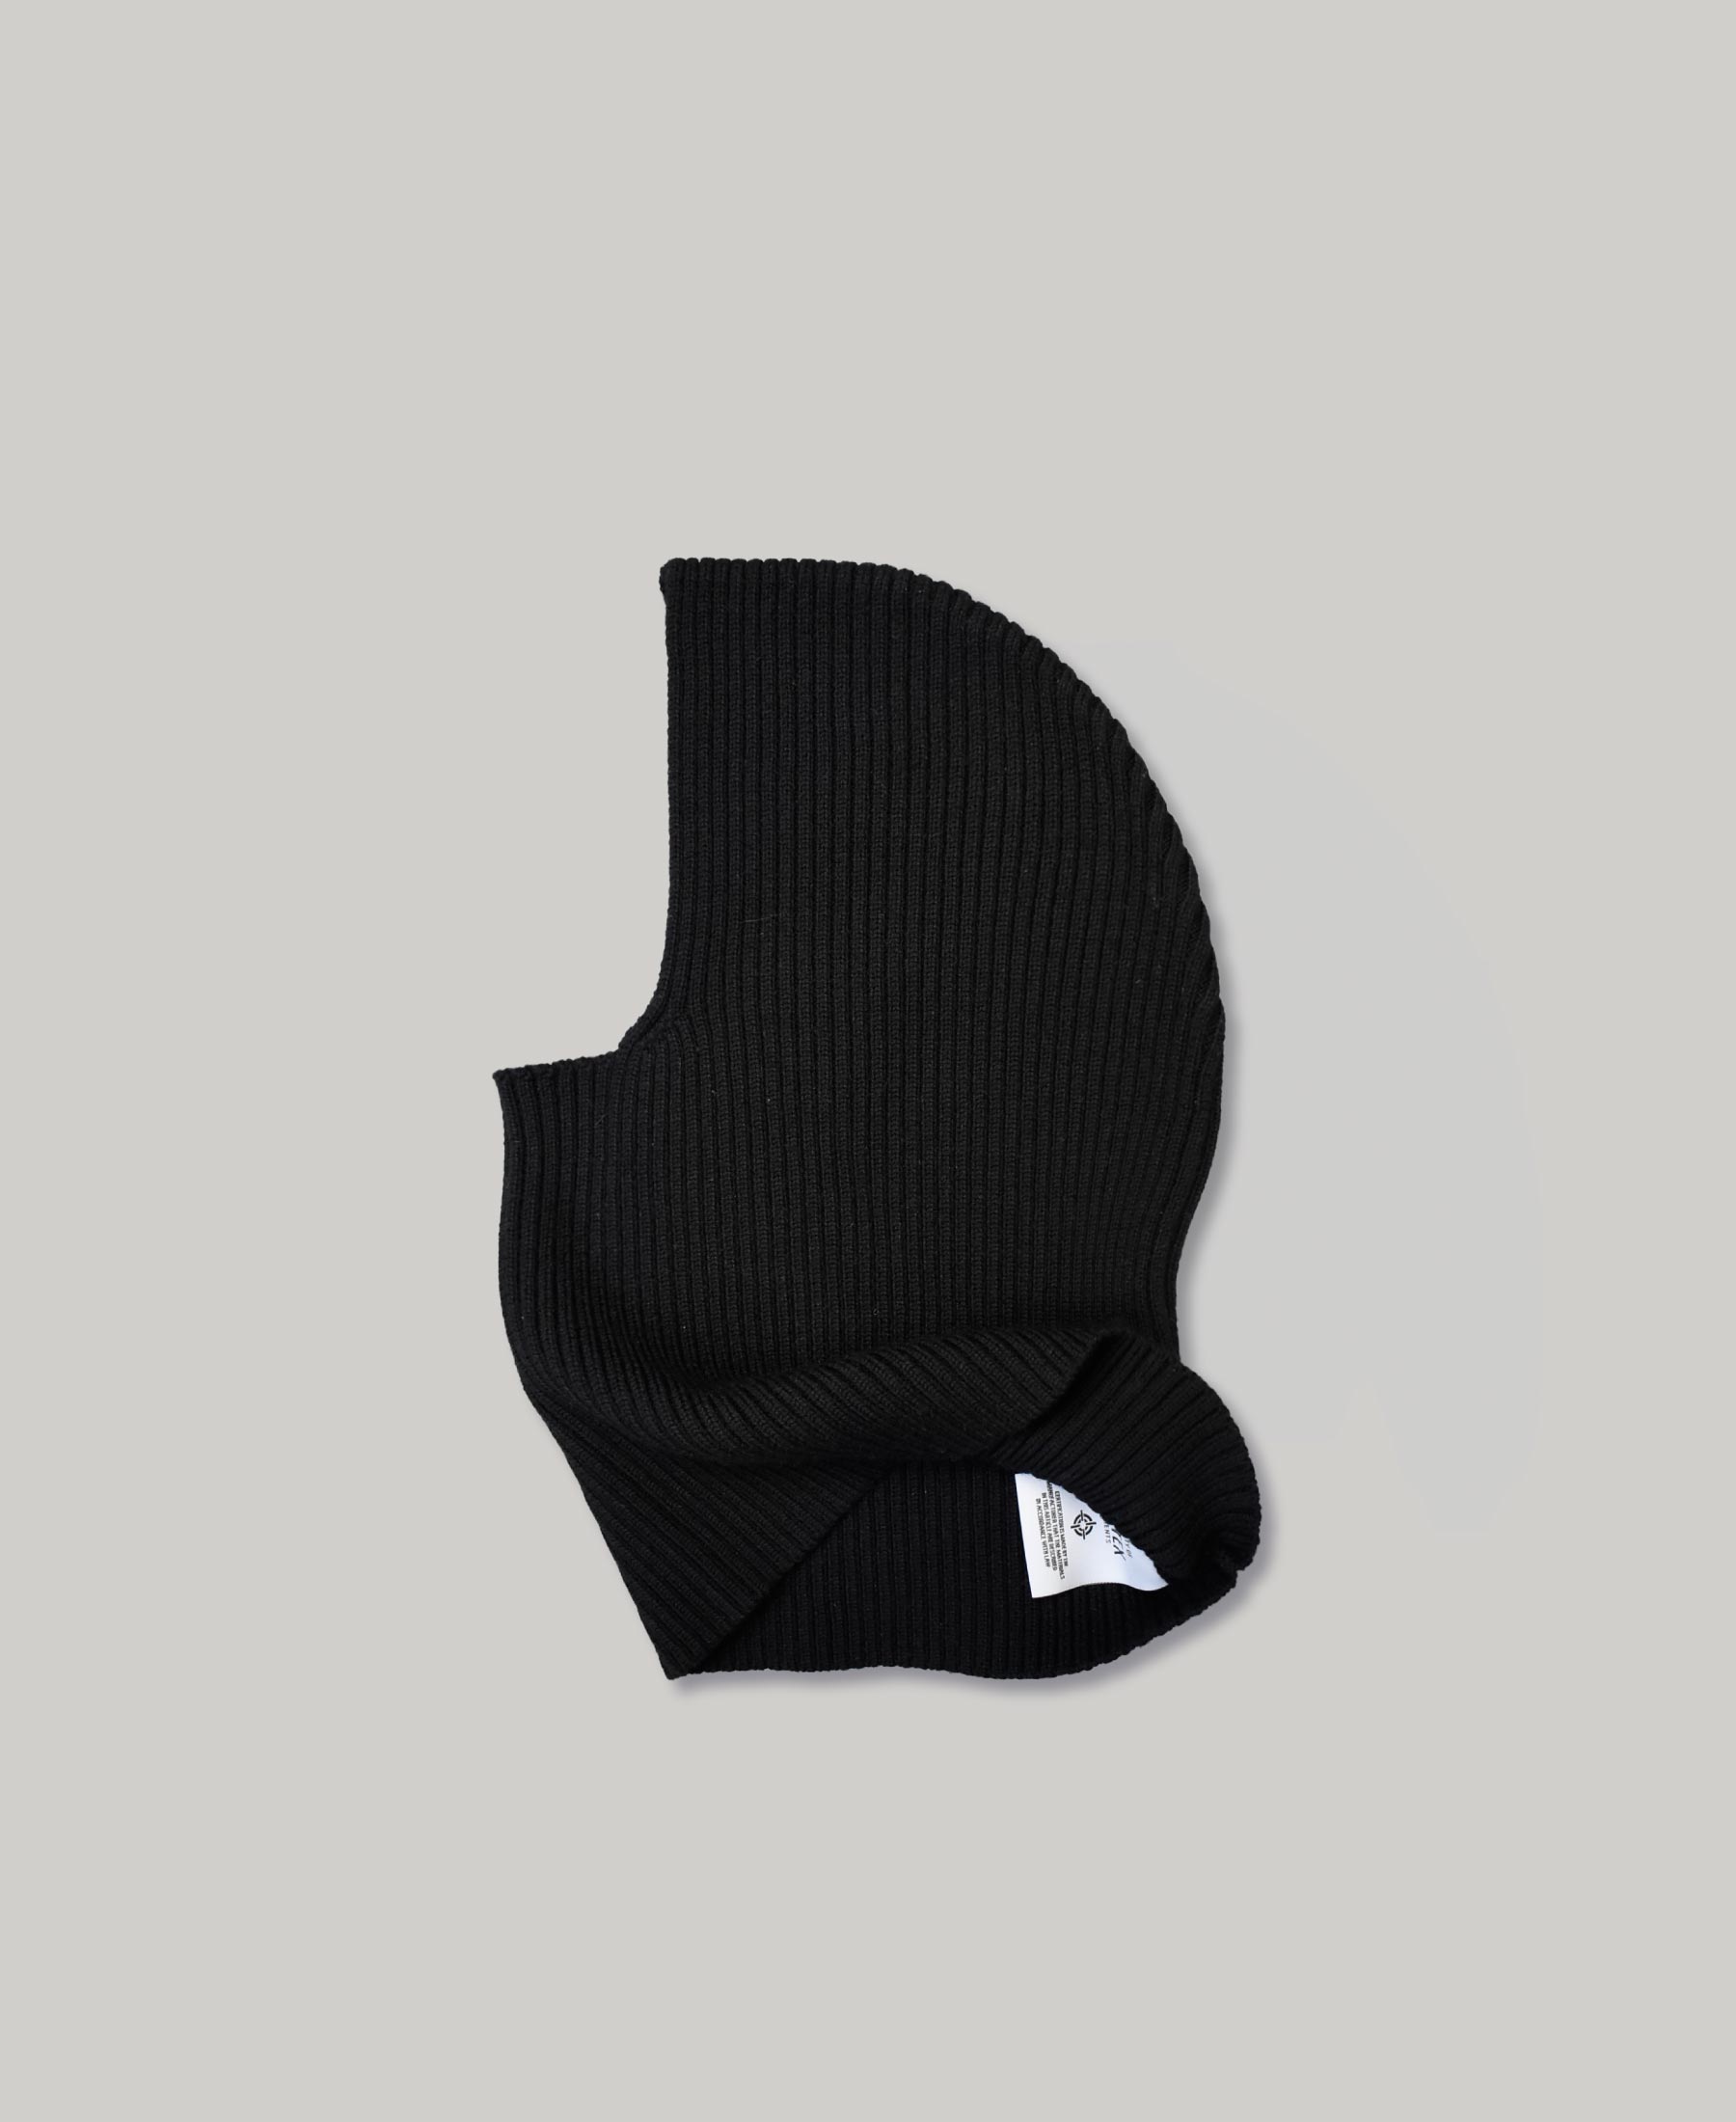 RELAXED FIT BALACLAVA | BLACK